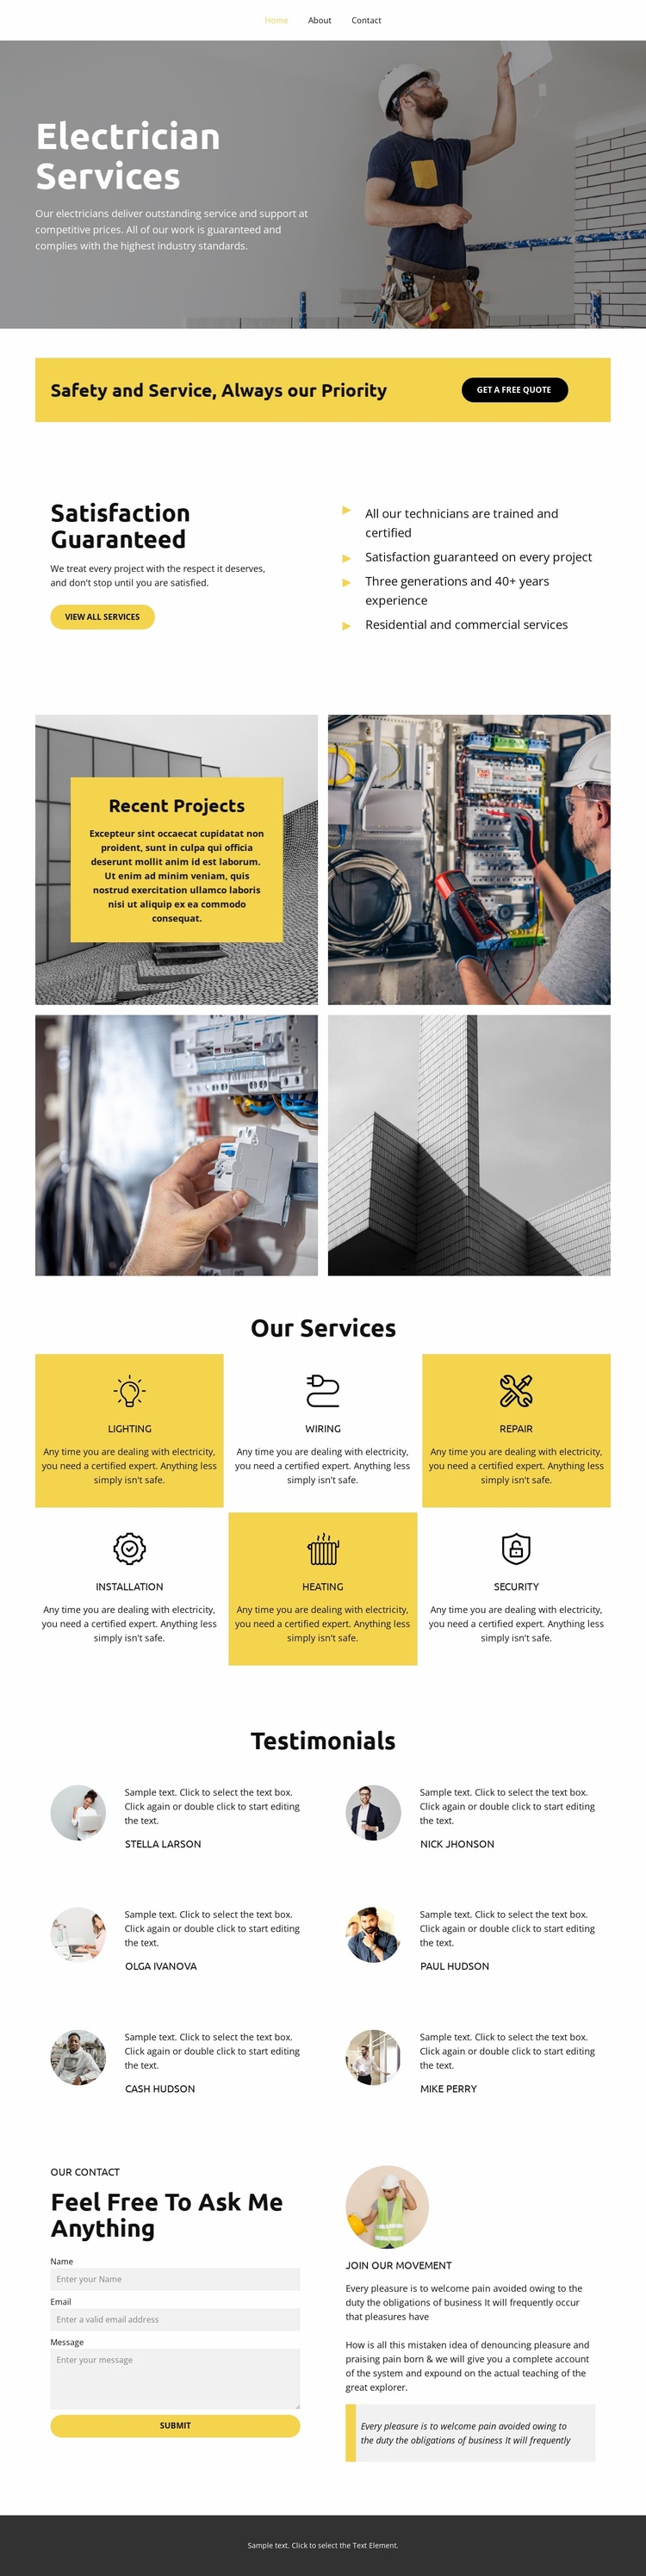 Electrician Services eCommerce Template